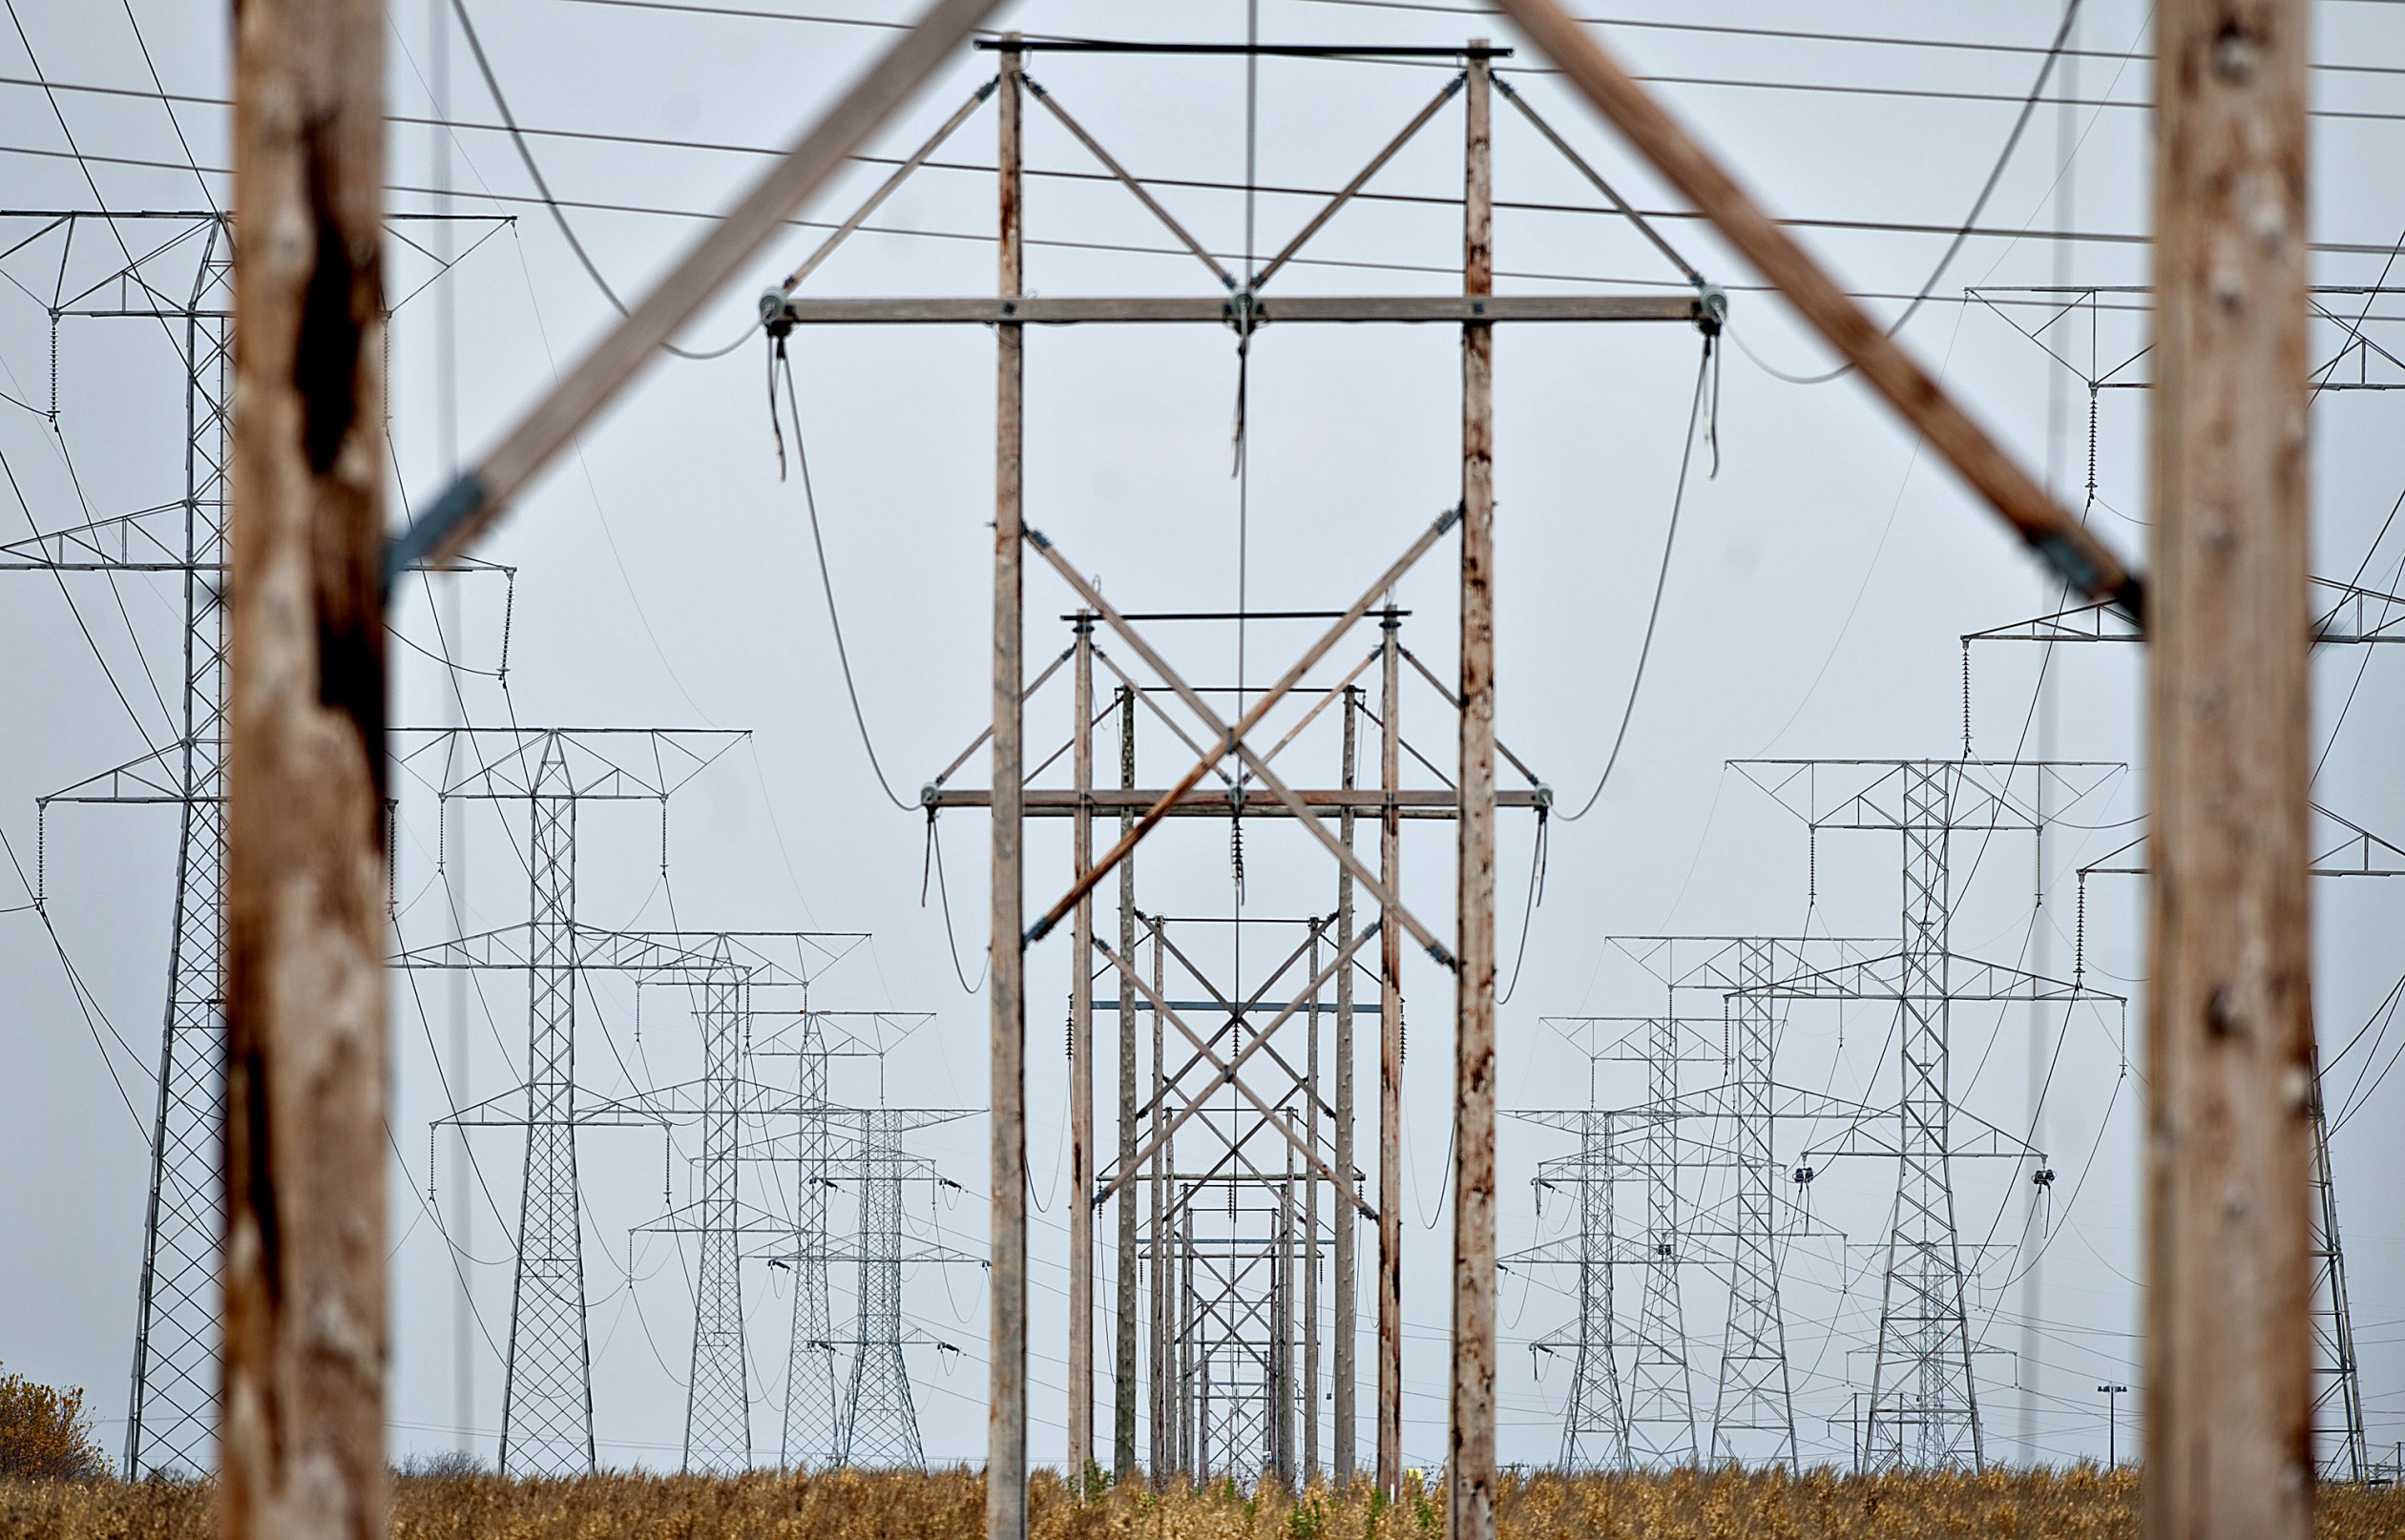 Electrical lines hang from transmission towers near the natural gas fired 1200-megawatt Kendall Energy power plant, owned by Dynegy Inc., in Minooka, Illinois, U.S., on Sunday, Nov. 6, 2011.